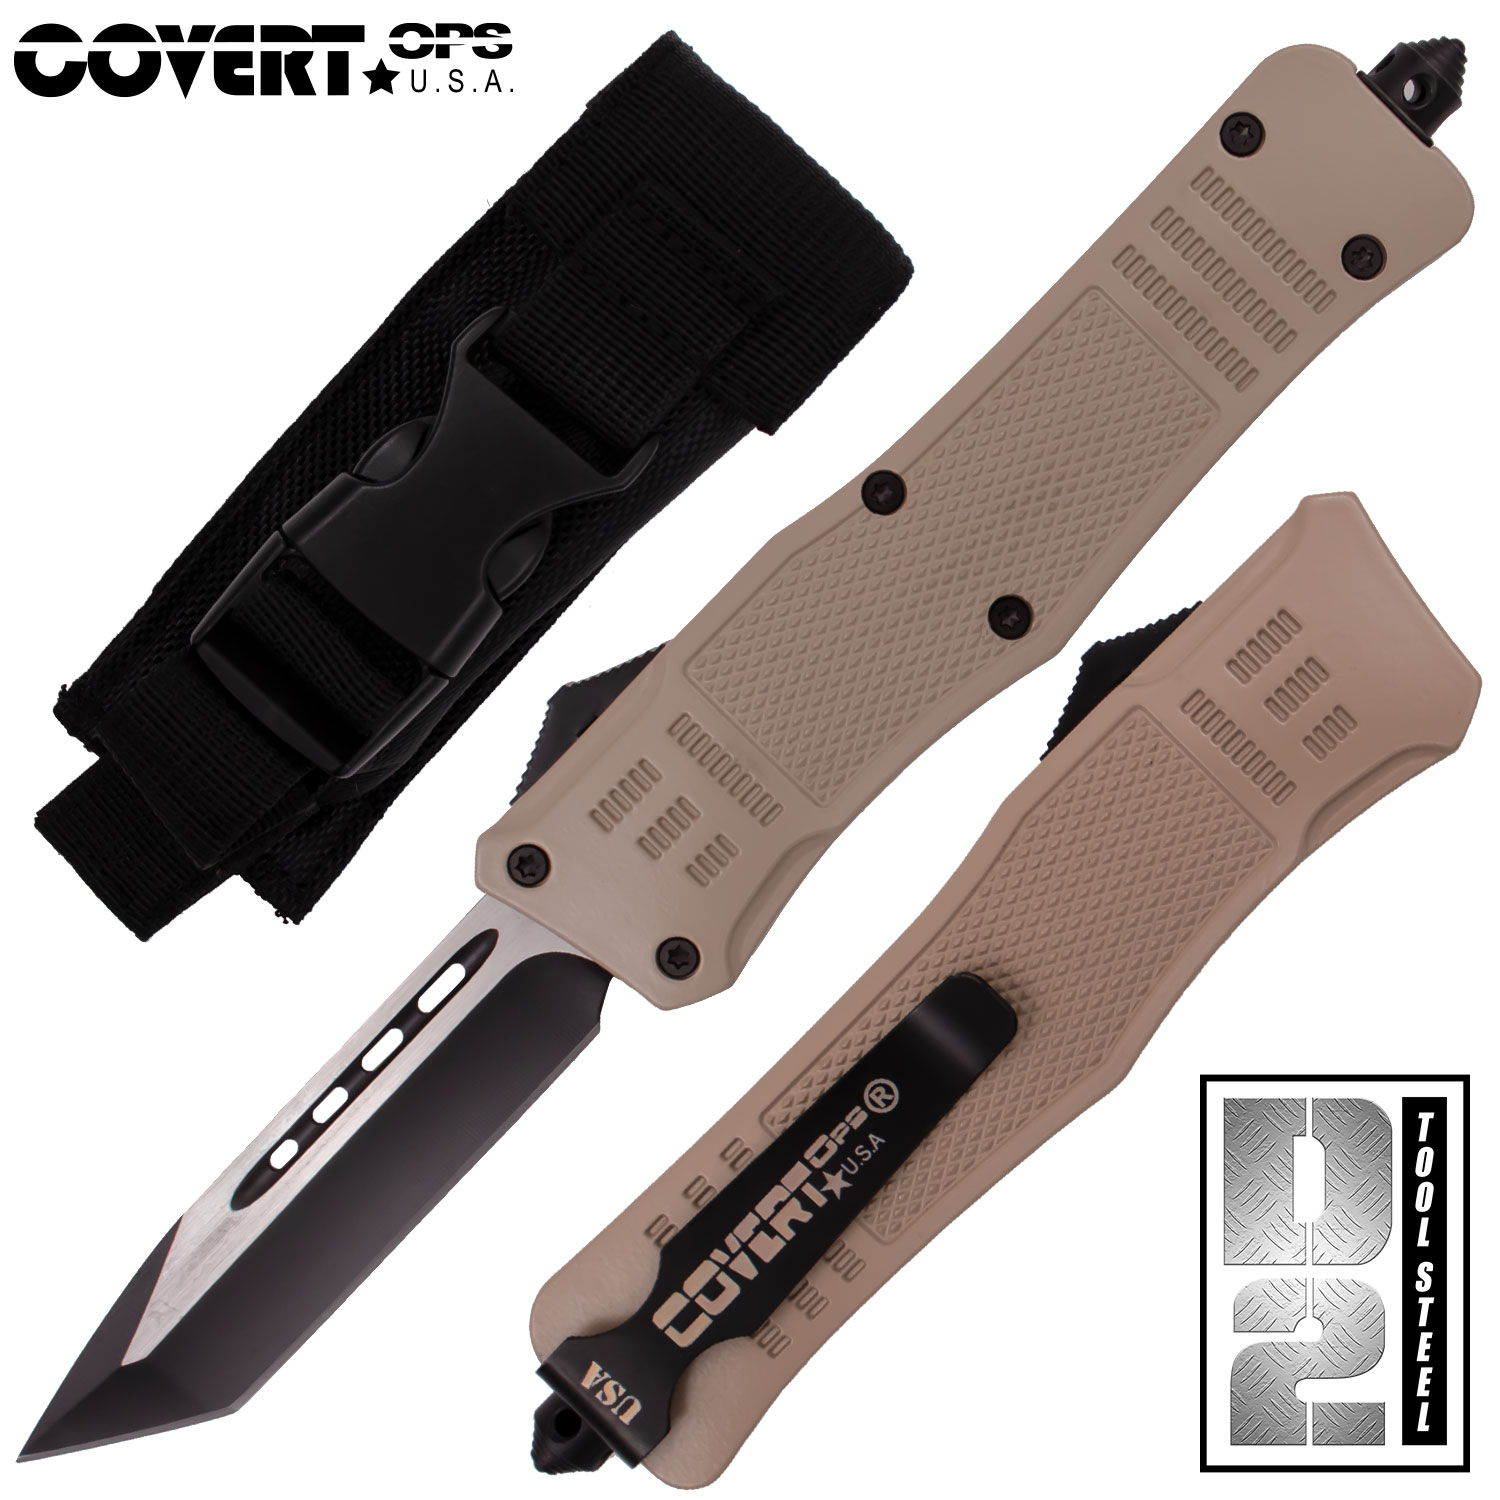 Covert OPS USA OTF Automatic Knife 9 inch Beige D2 Steel Blade Tanto